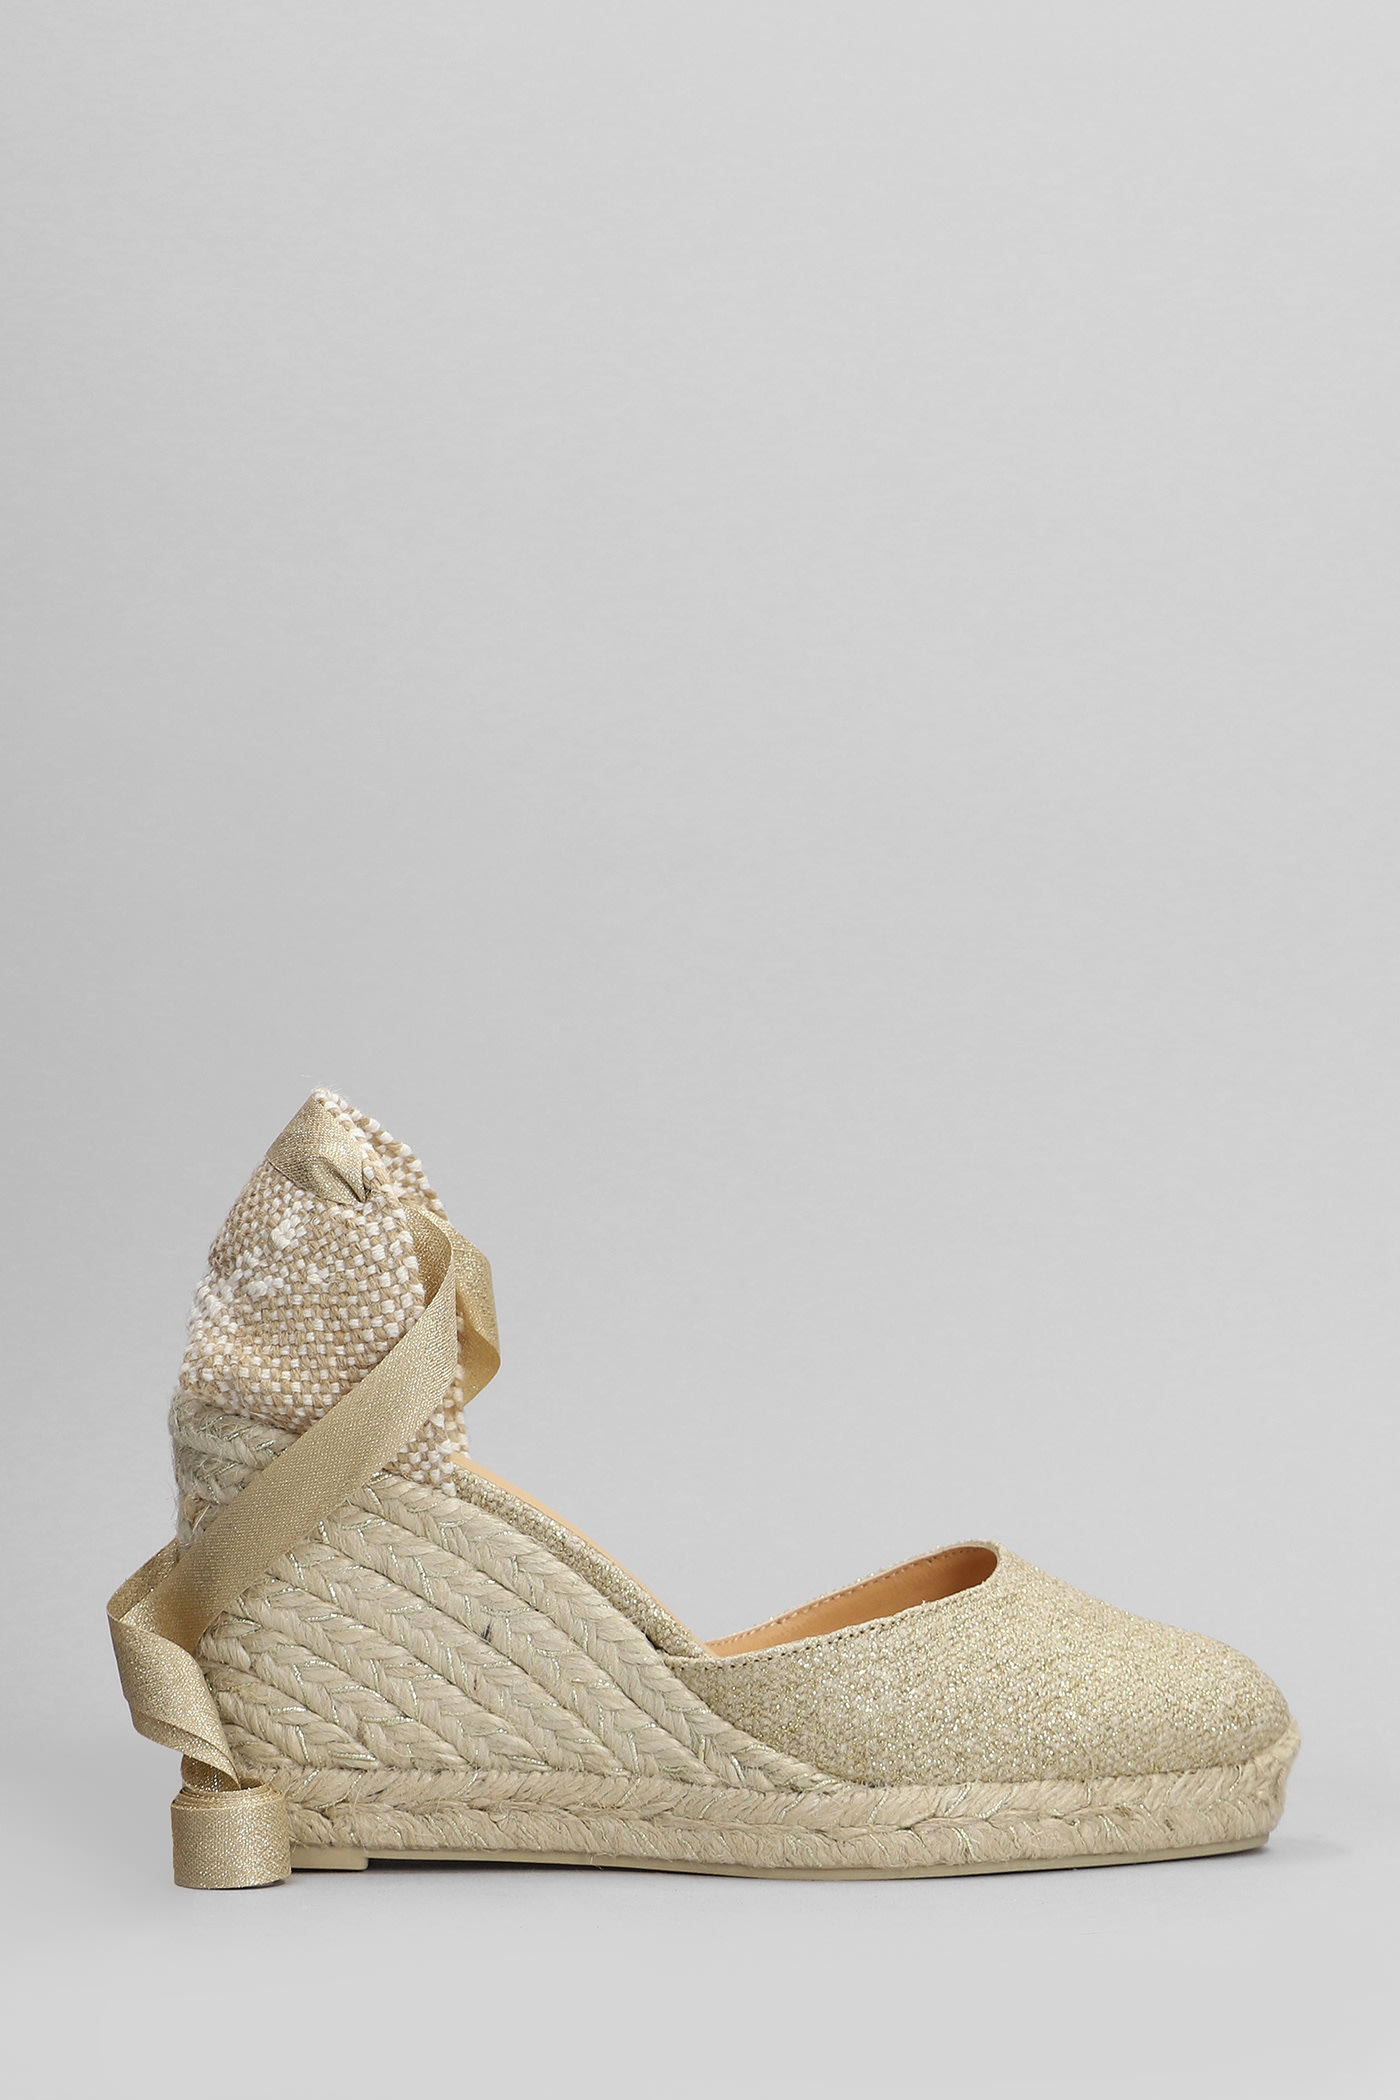 Castañer Carina-8-032 Wedges In Gold Canvas